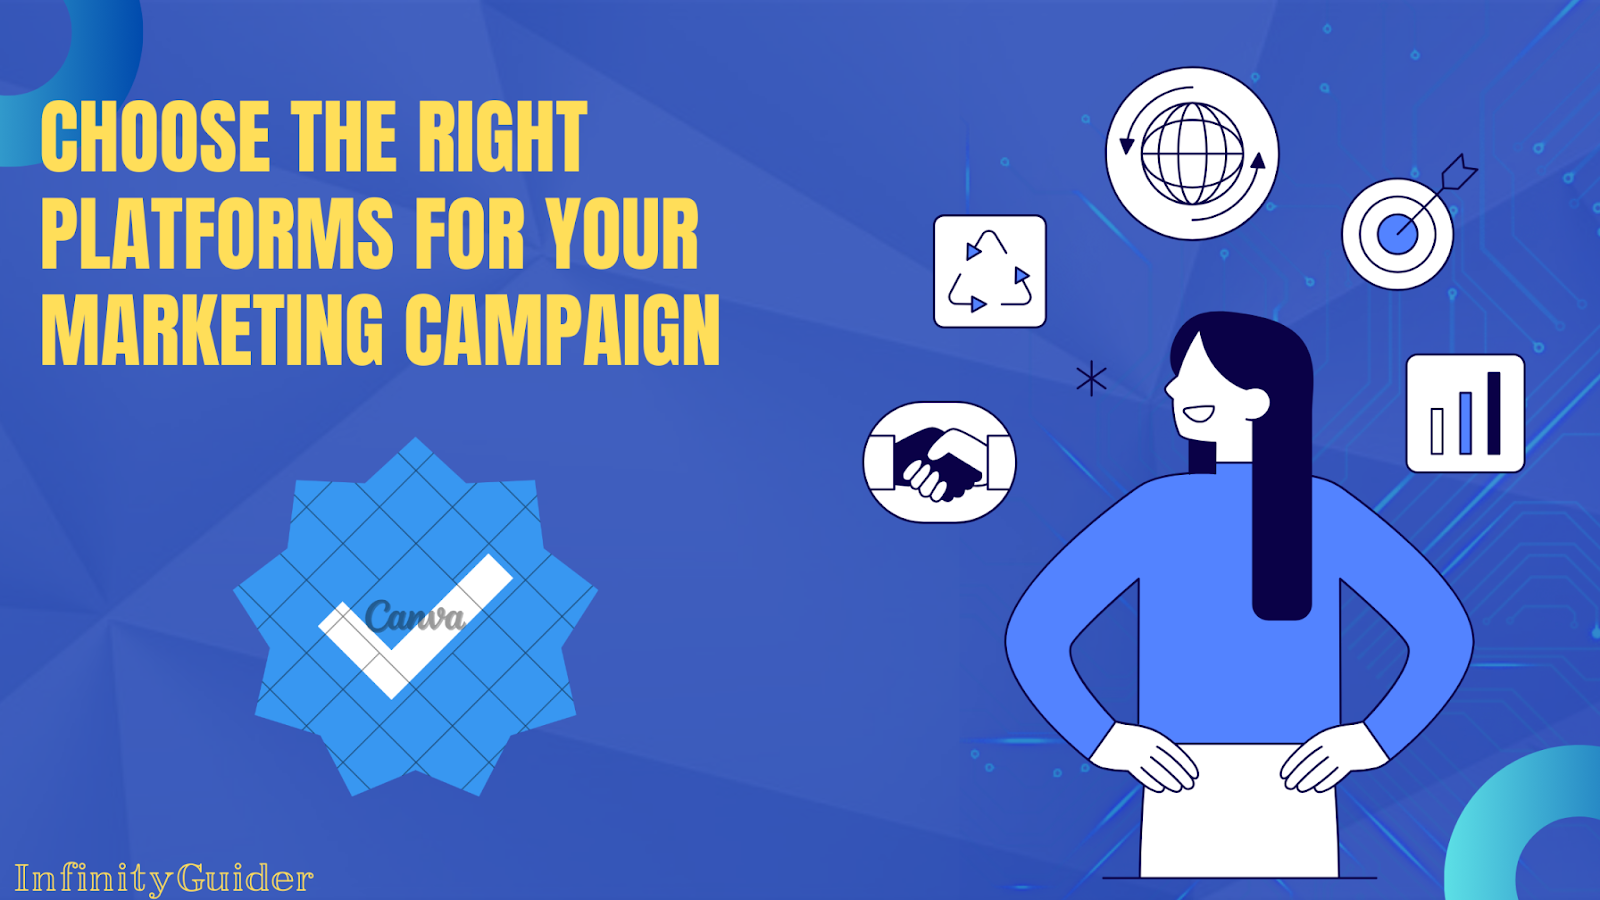 Choose the Right Platforms for your marketing compagine